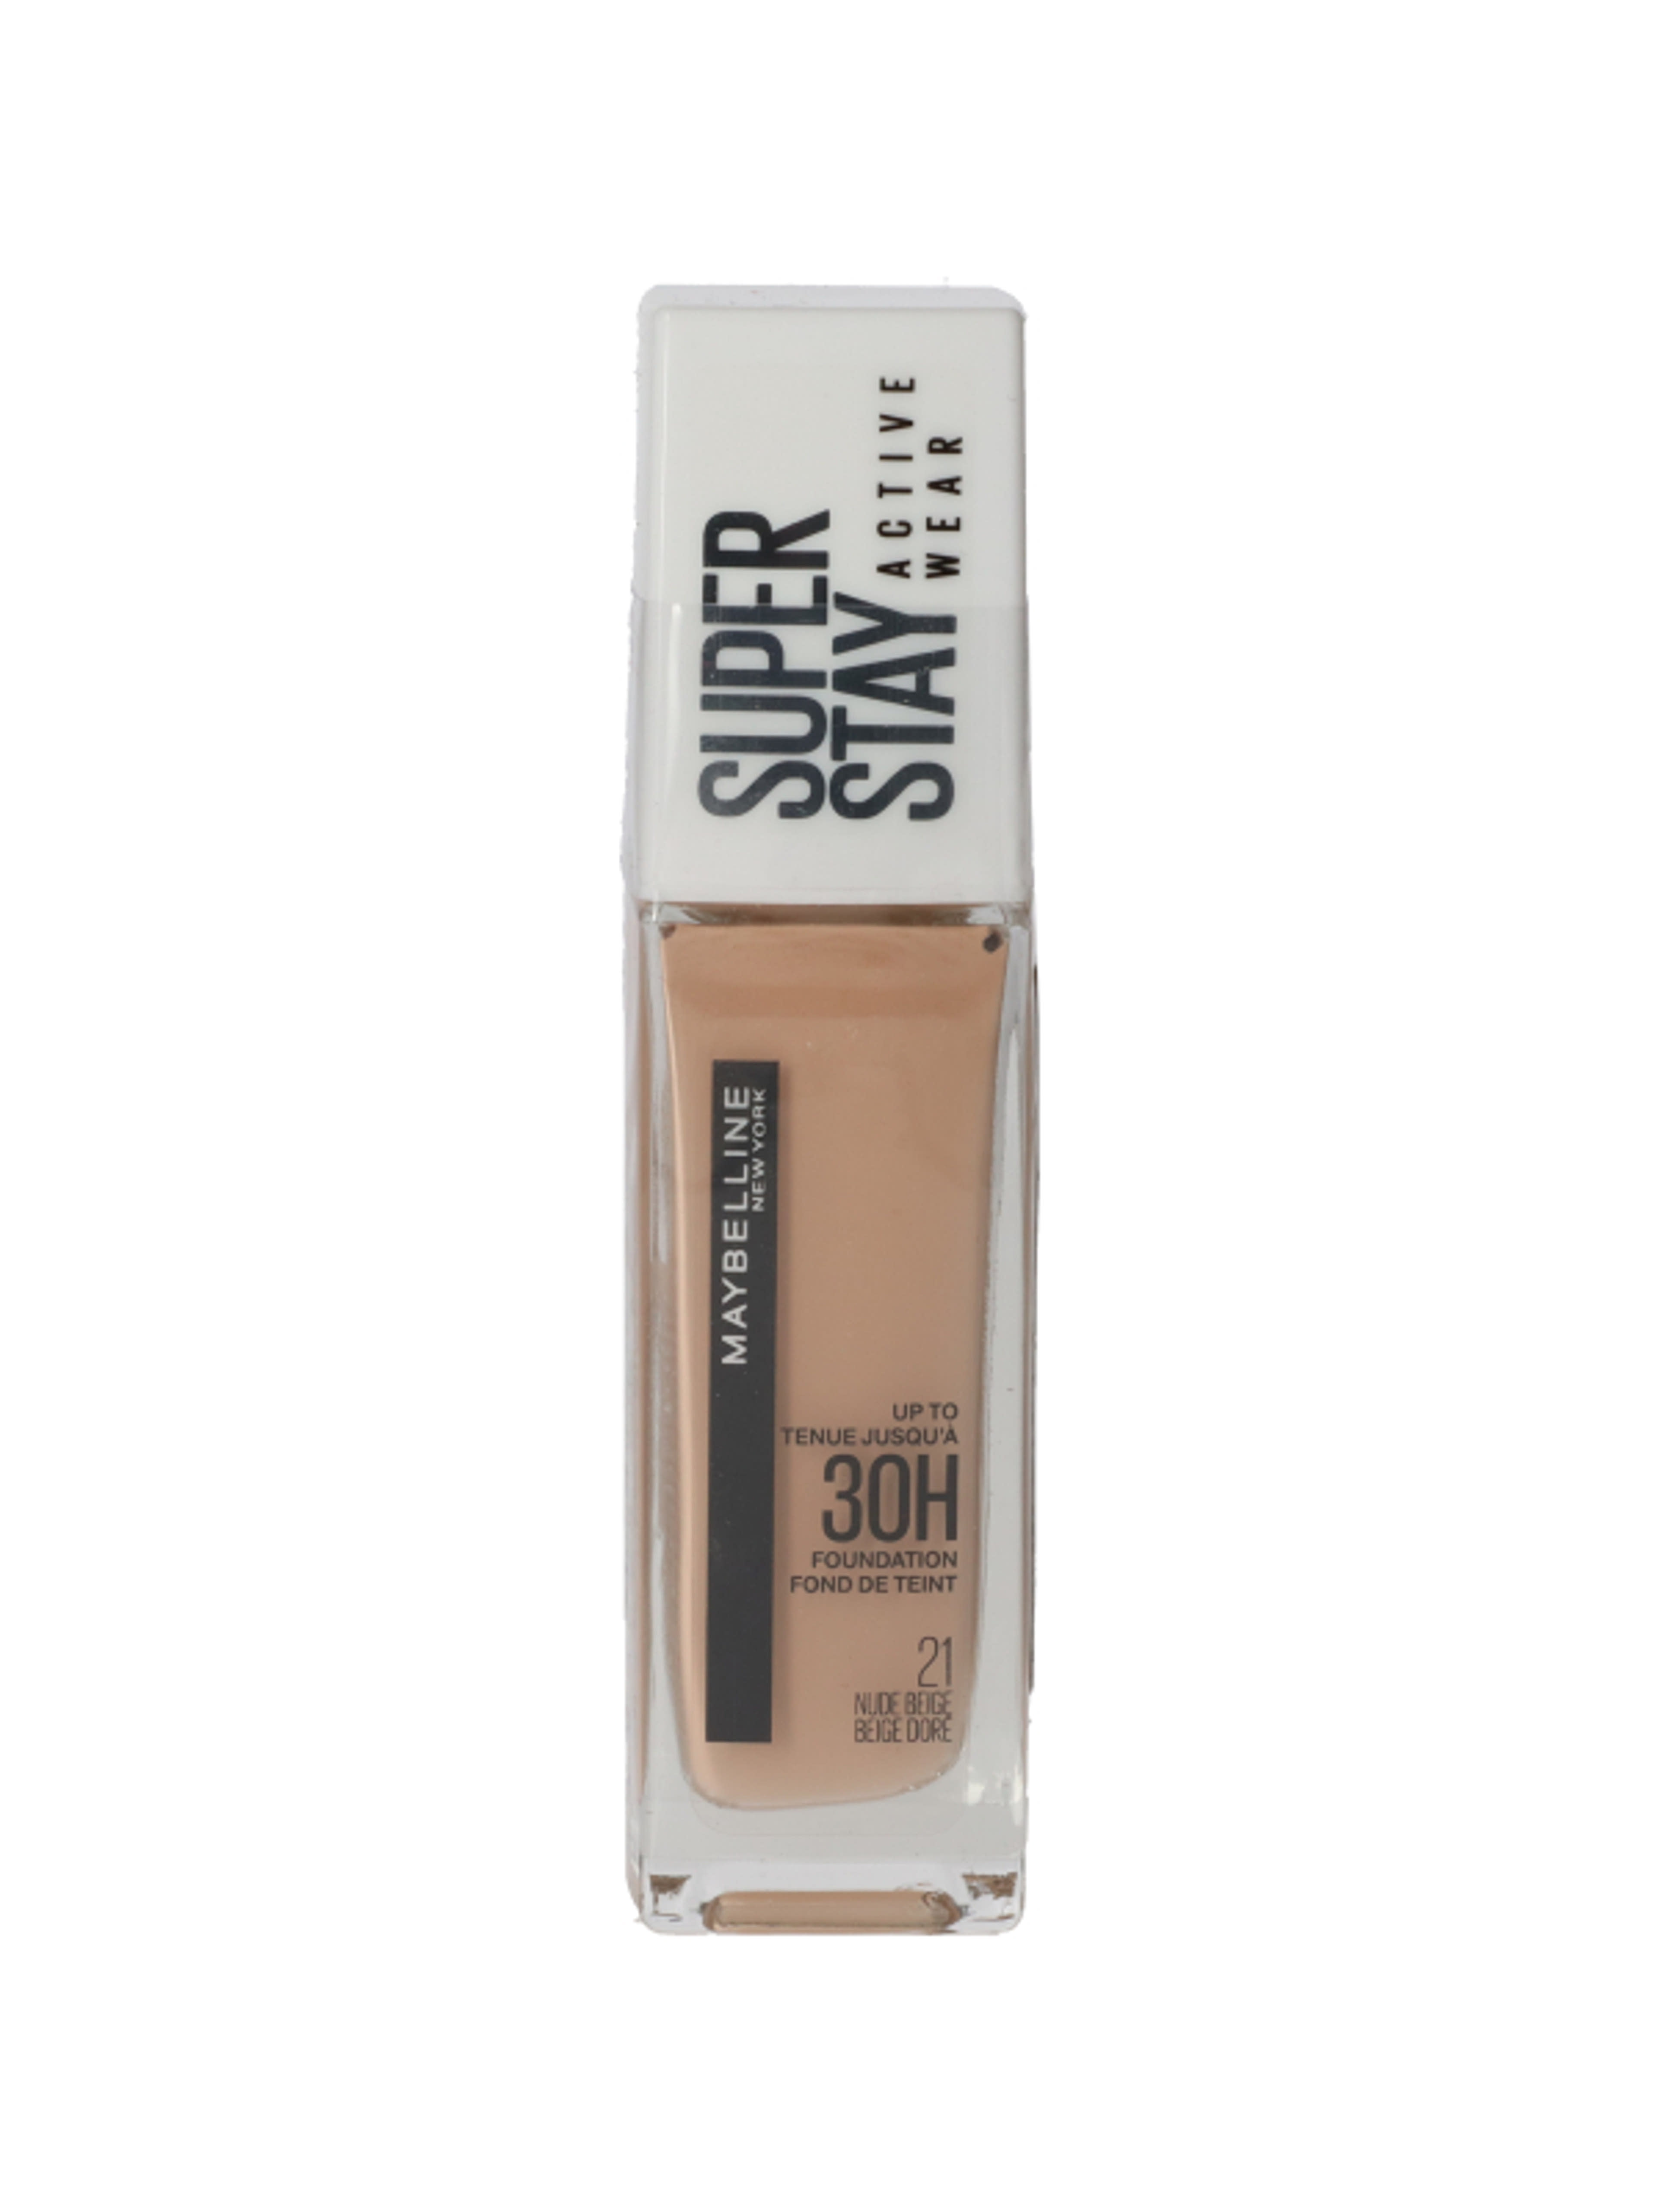 Maybelline Super Stay Active Wear alapozó /21 Nude Beige - 1 db